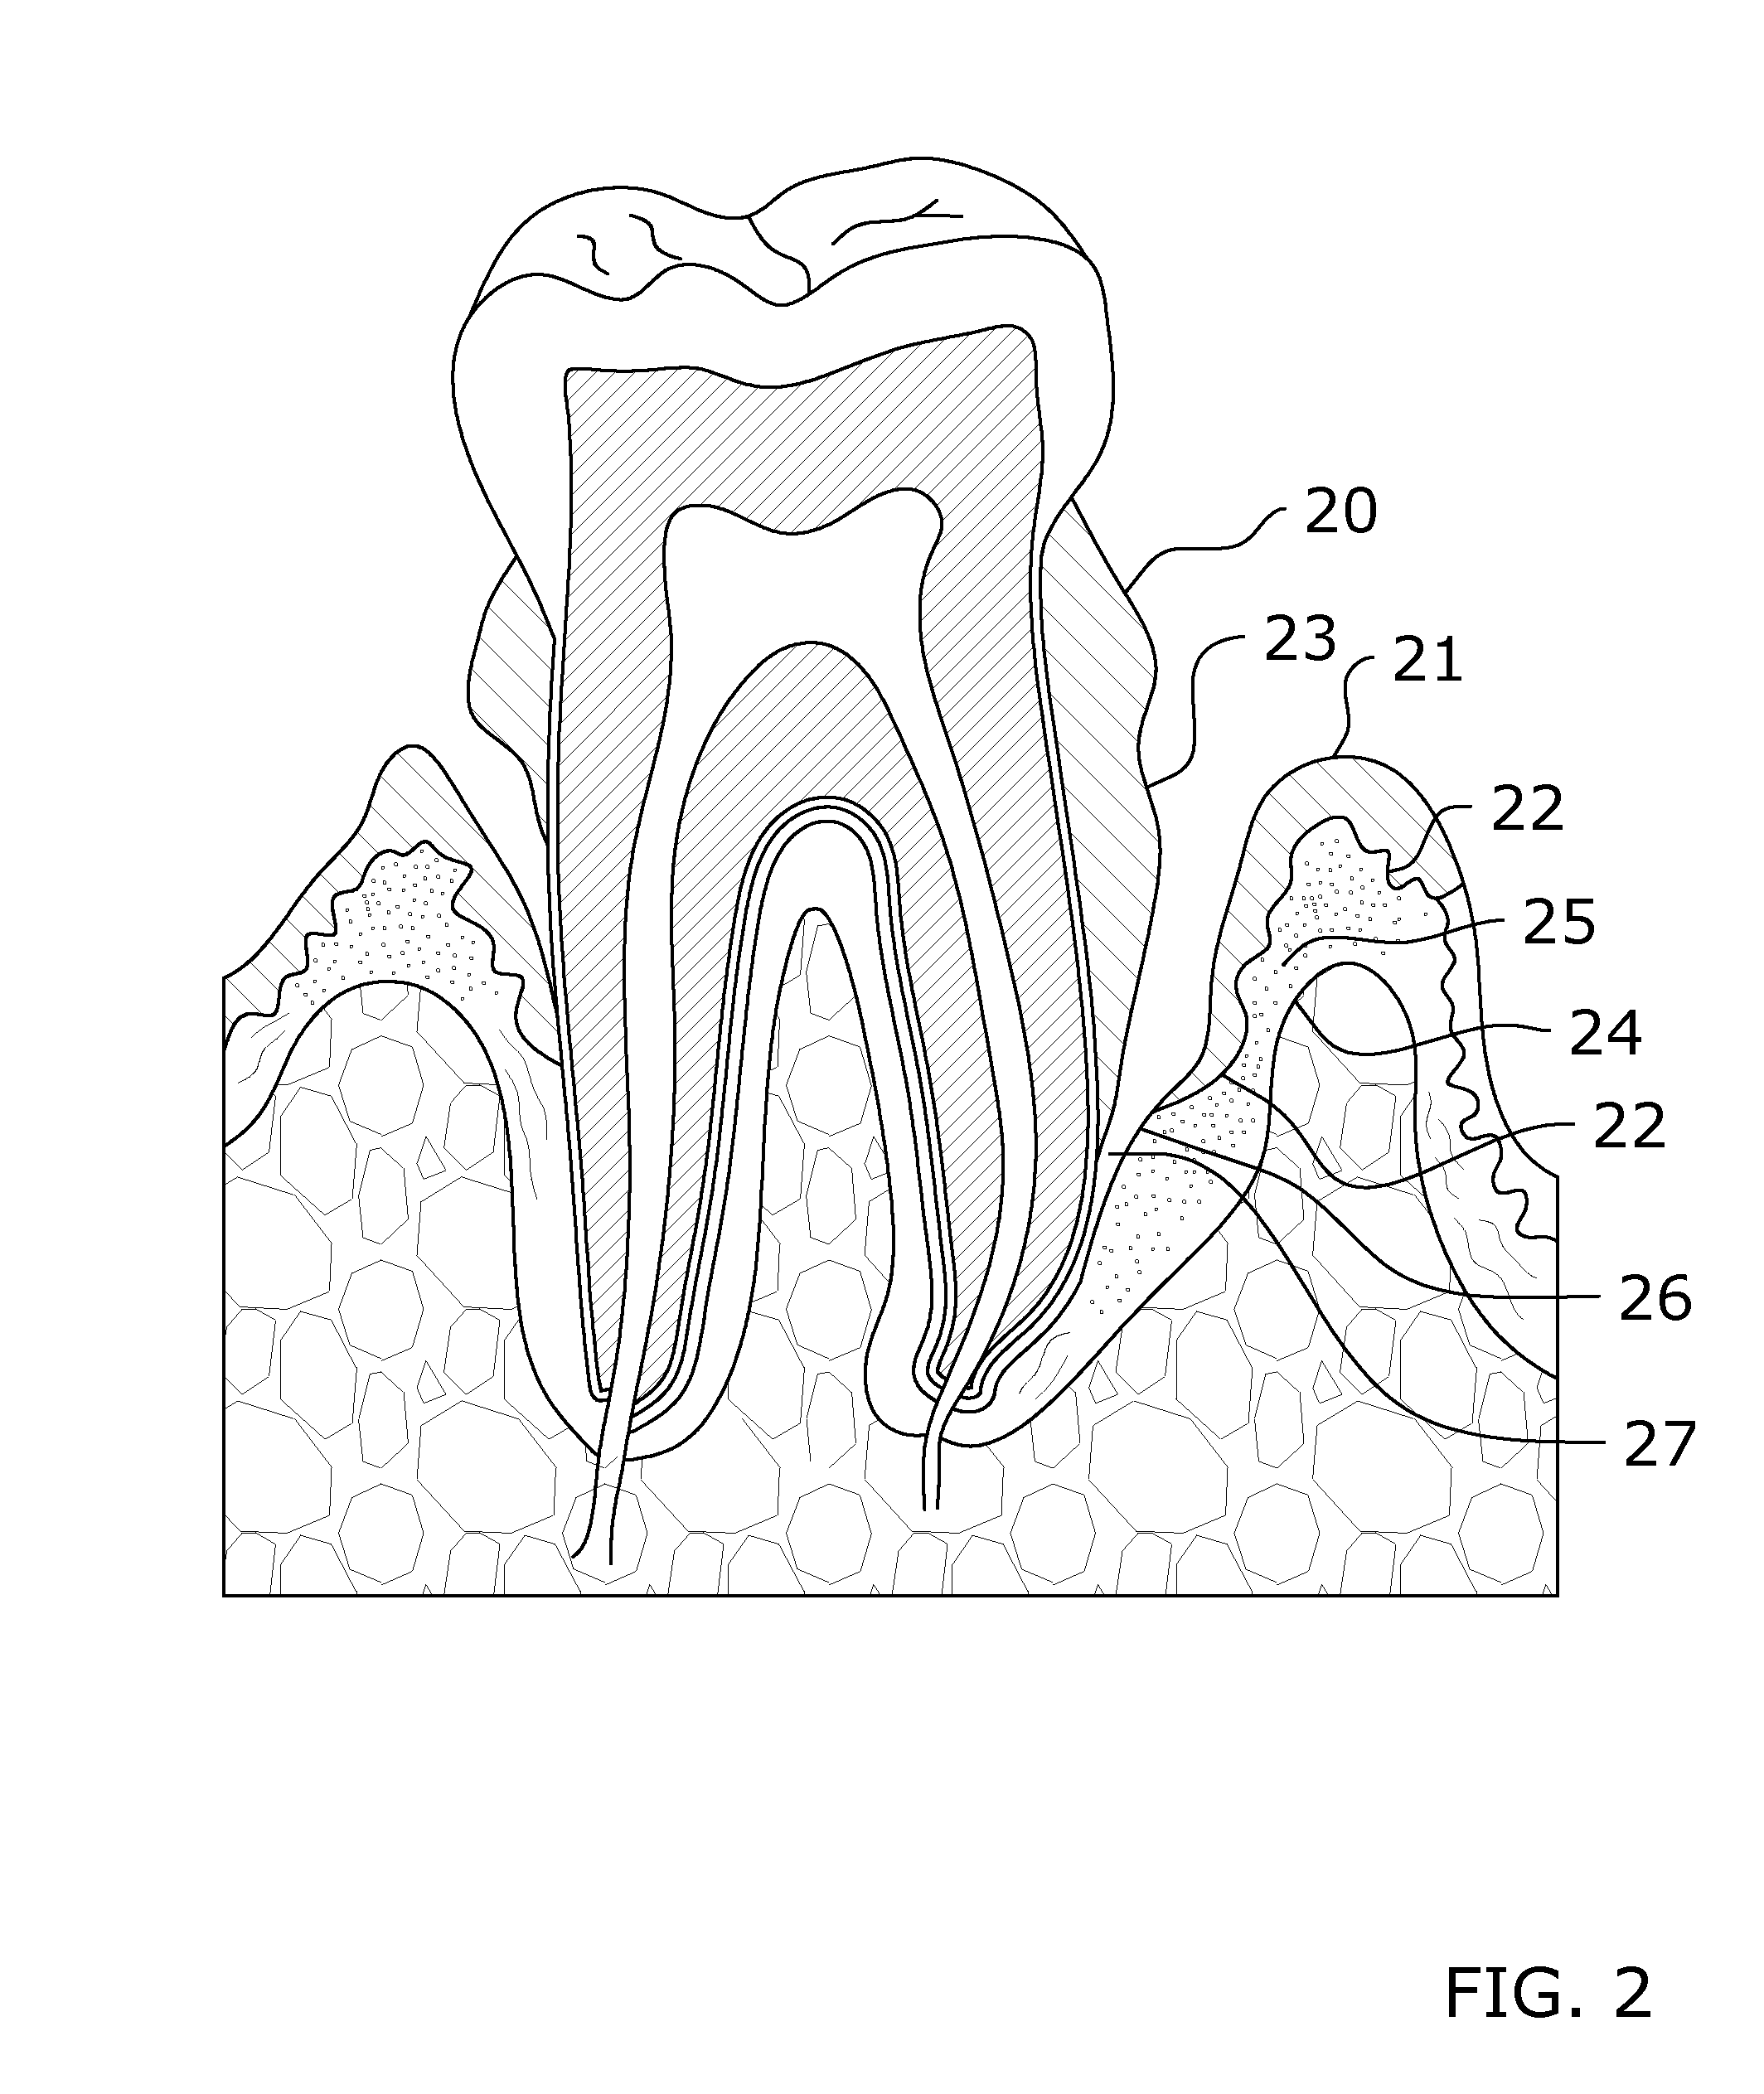 Oral Care System and Method